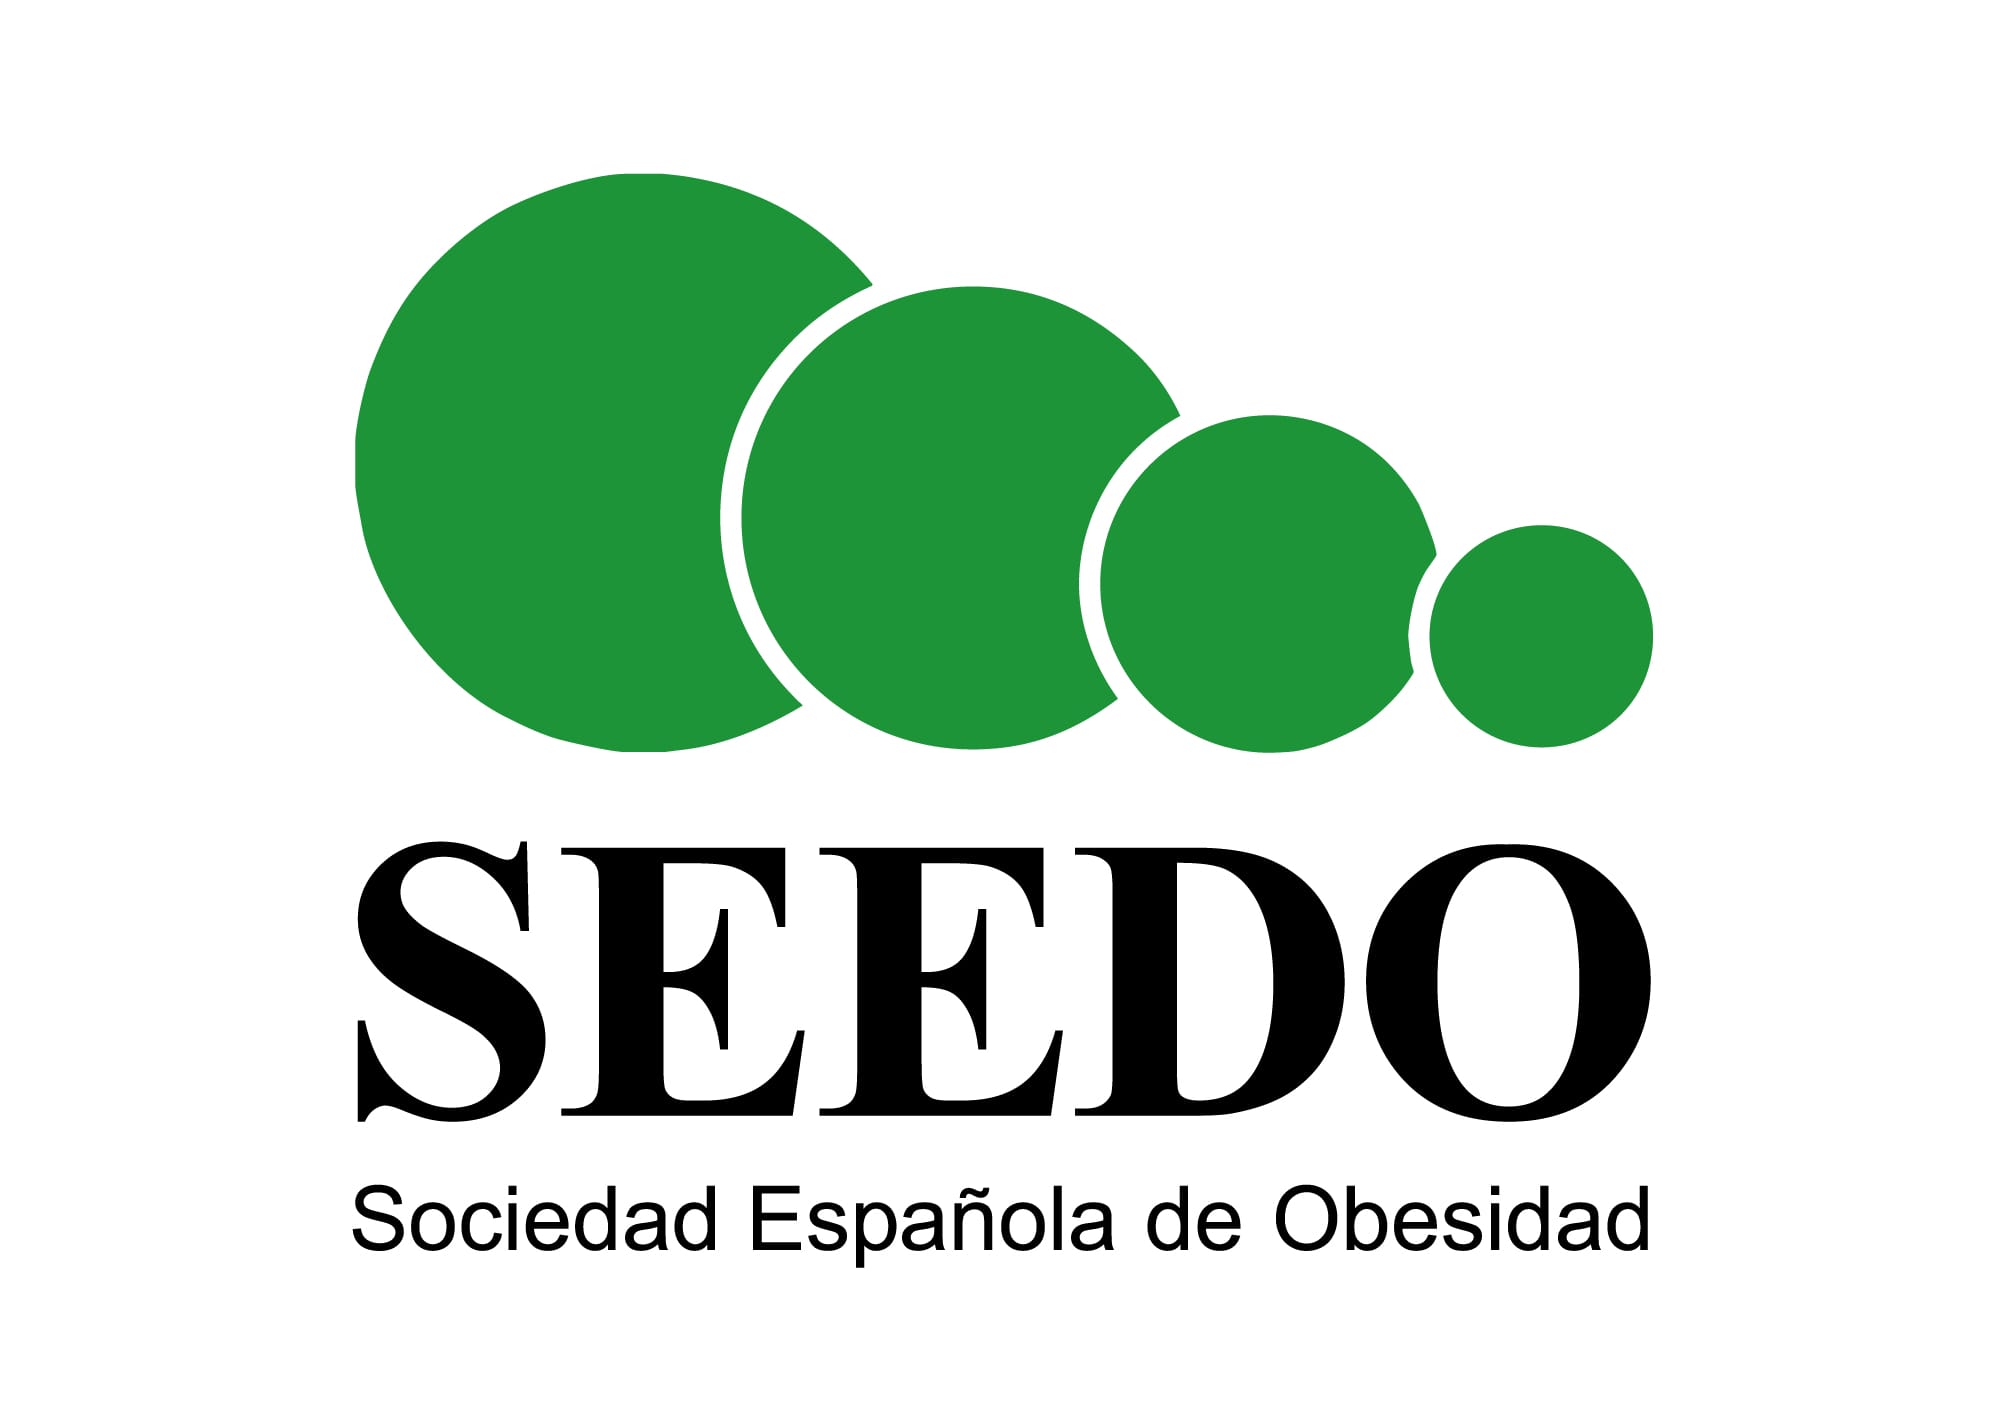 Logo of SEEDO featuring a series of green circles decreasing in size from left to right, symbolizing weight loss, with text "SEEDO Sociedad Española de Obesidad" below.